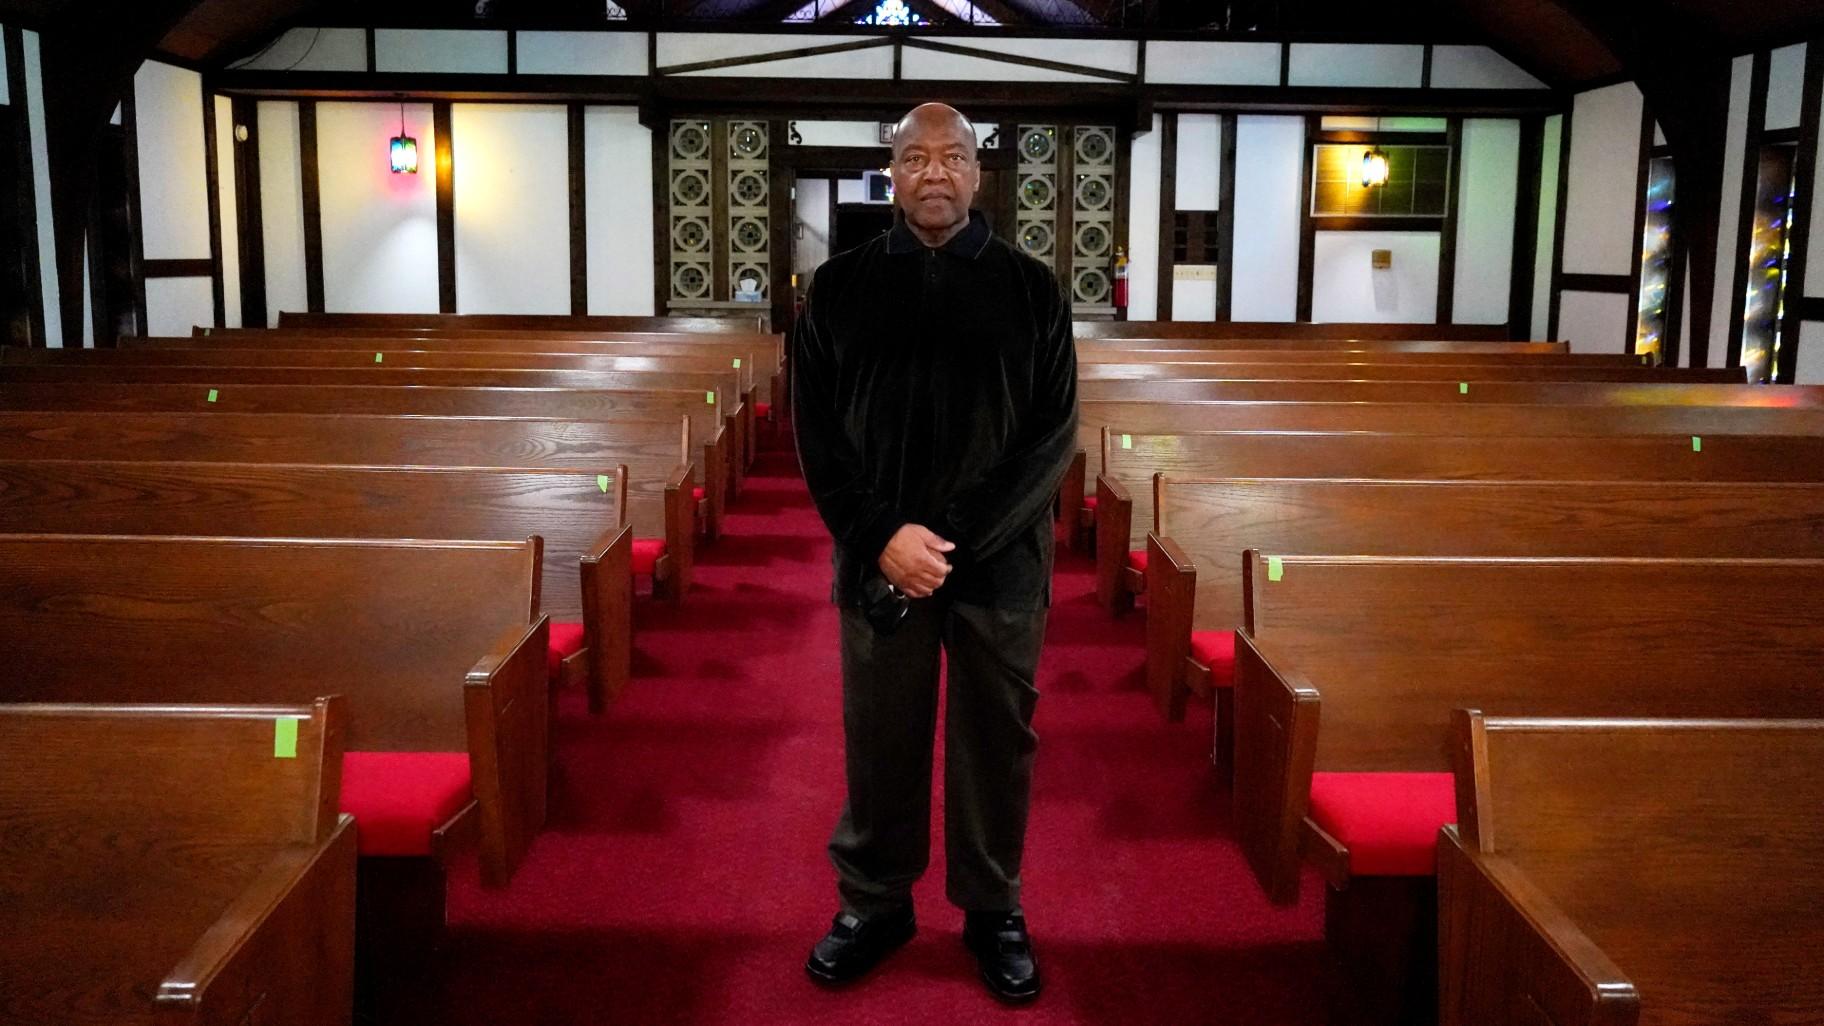 Reverend David Bigsby poses for a photo at his church in Lansing, Ill., Tuesday, Jan. 20, 2022. He moved to Lansing, Ill., 6 years ago, his predominantly black church grew during that time of at least 20%.  (AP Photo/Nam Y. Huh)